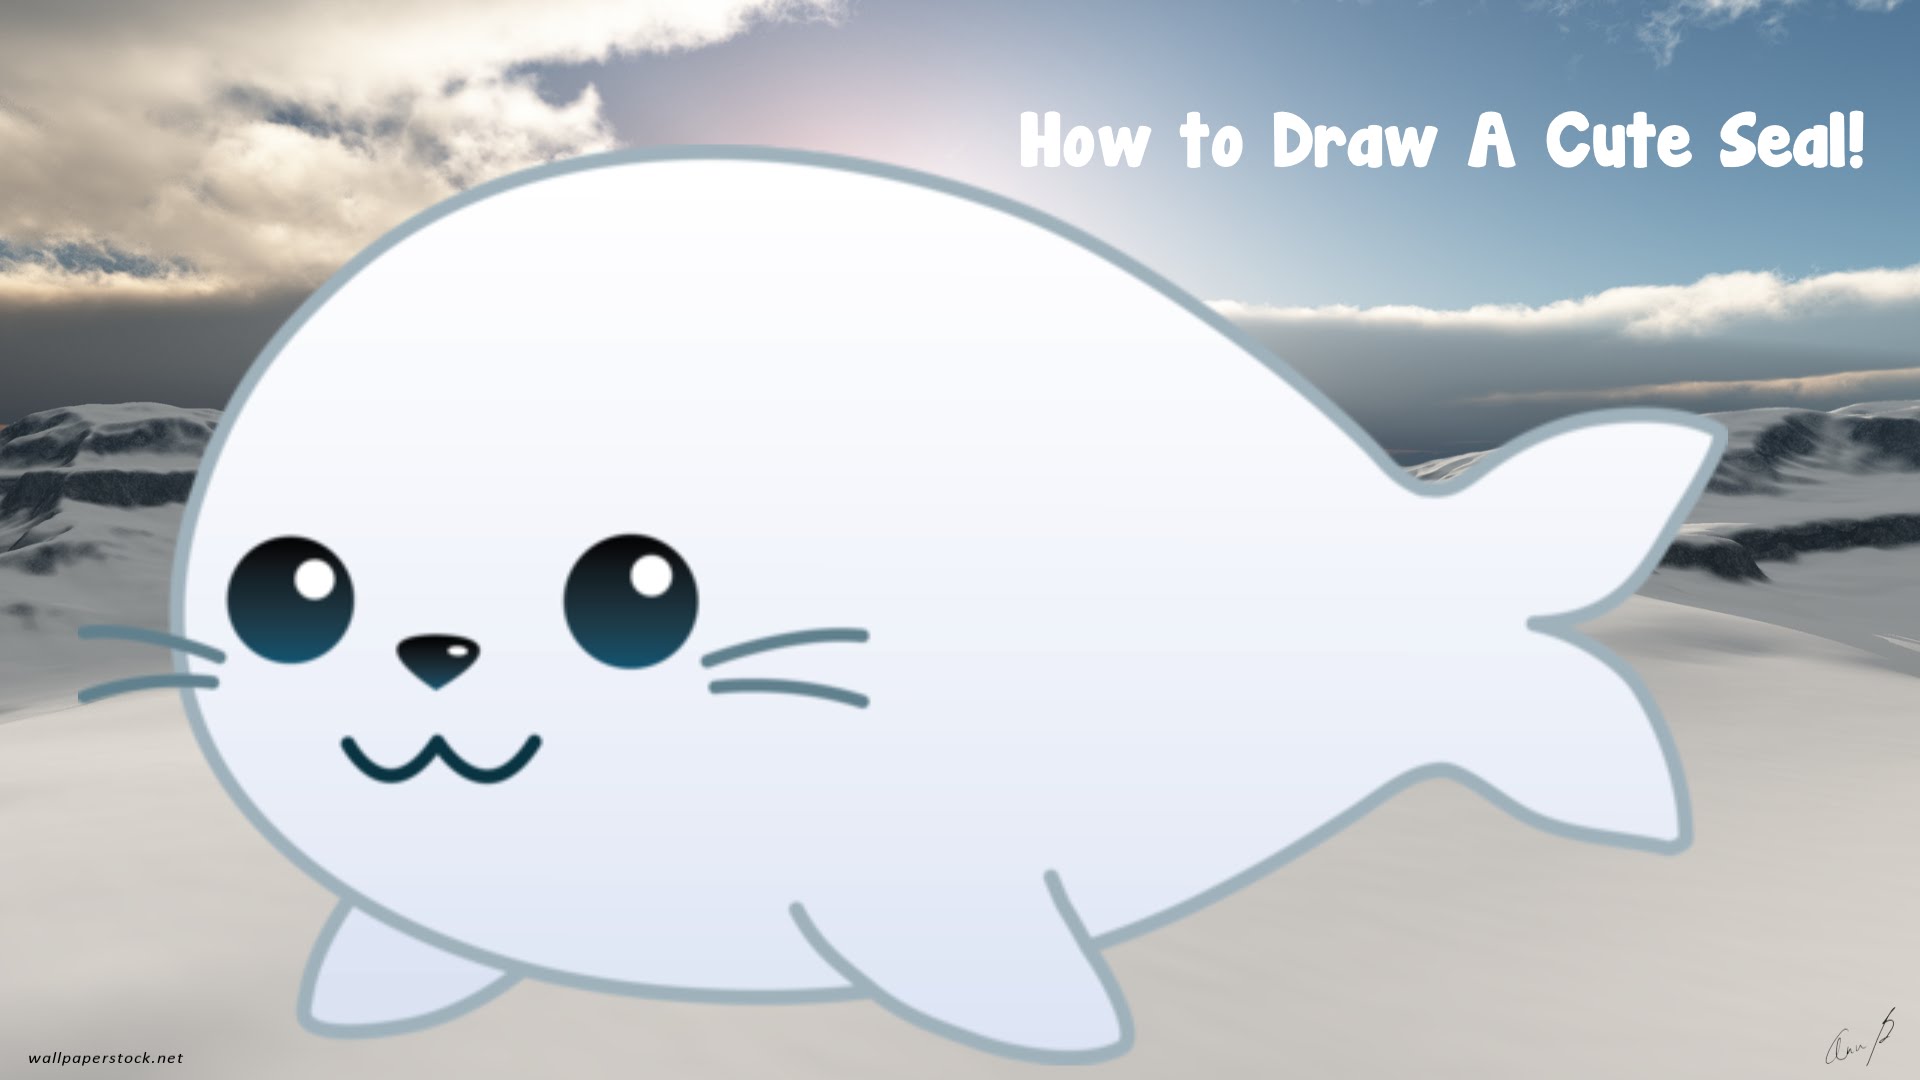 Cute Seal Drawing at GetDrawings.com | Free for personal use Cute ...